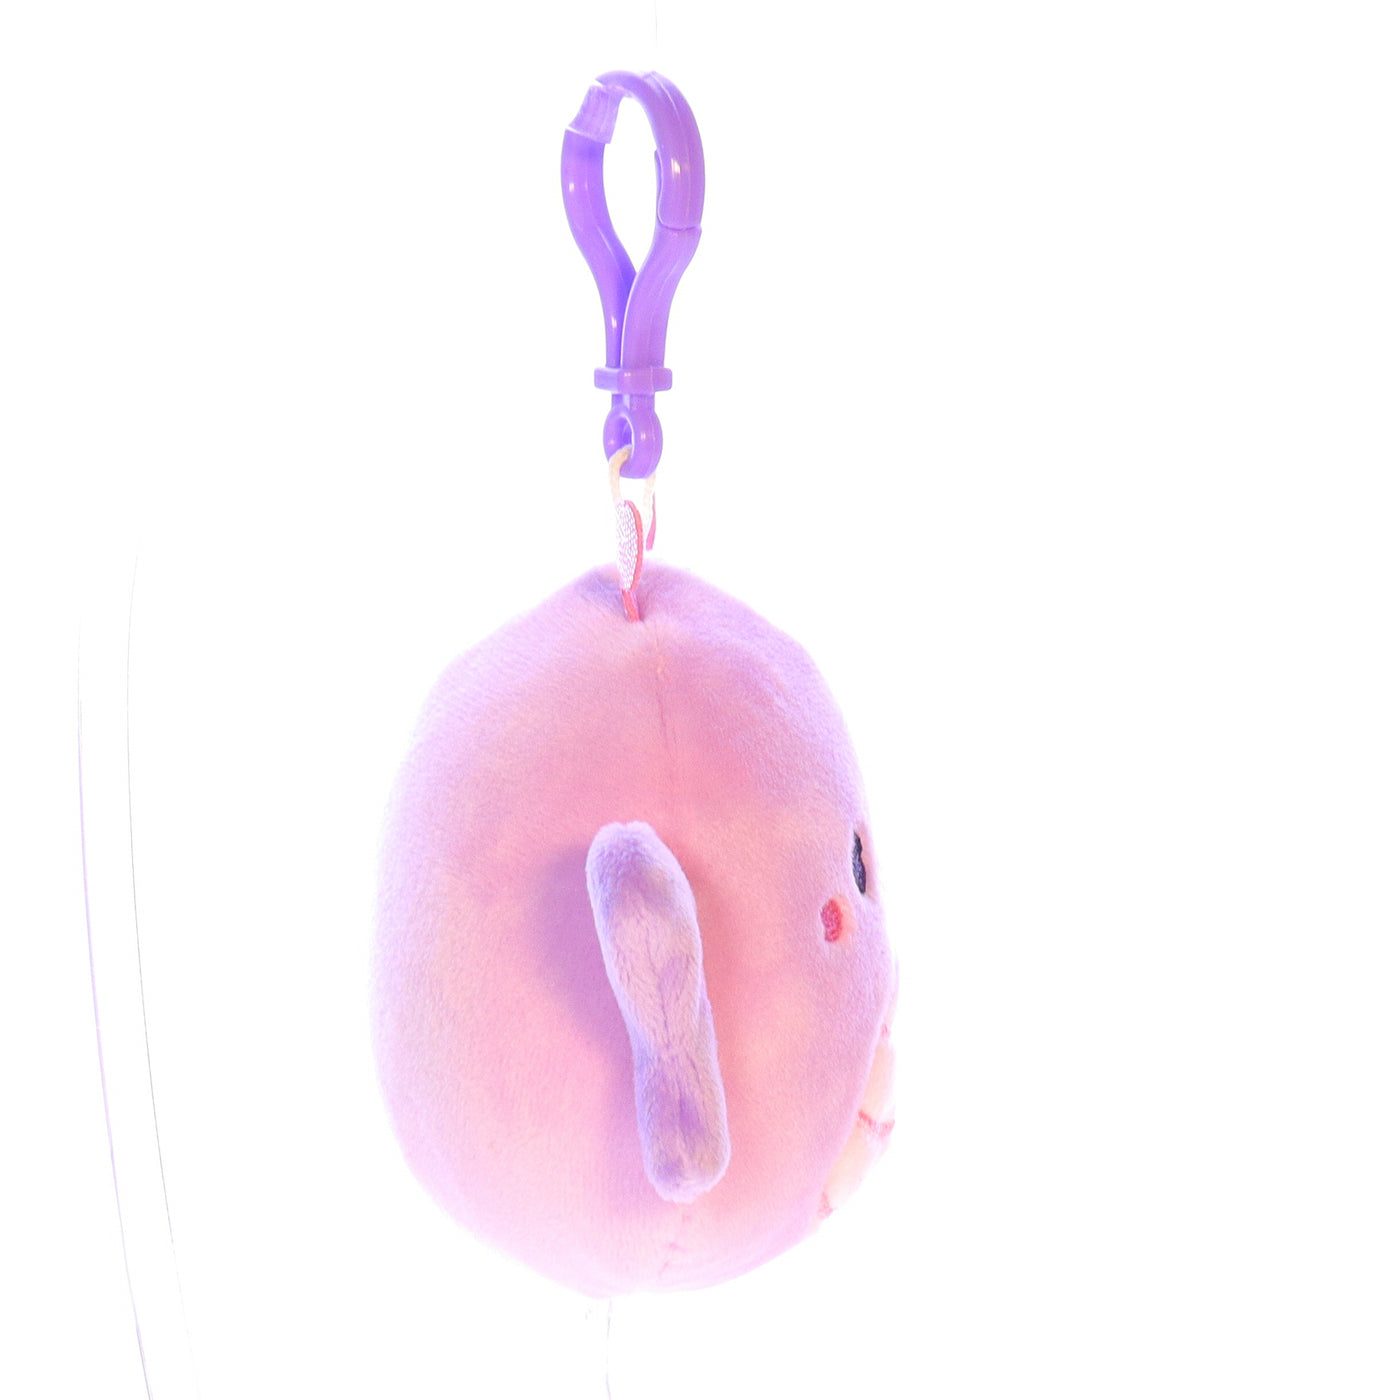 Squishmallows_734689975198_Brenda_the_Butterfly_Keychain_Stuffed_Animal_2019 Right View